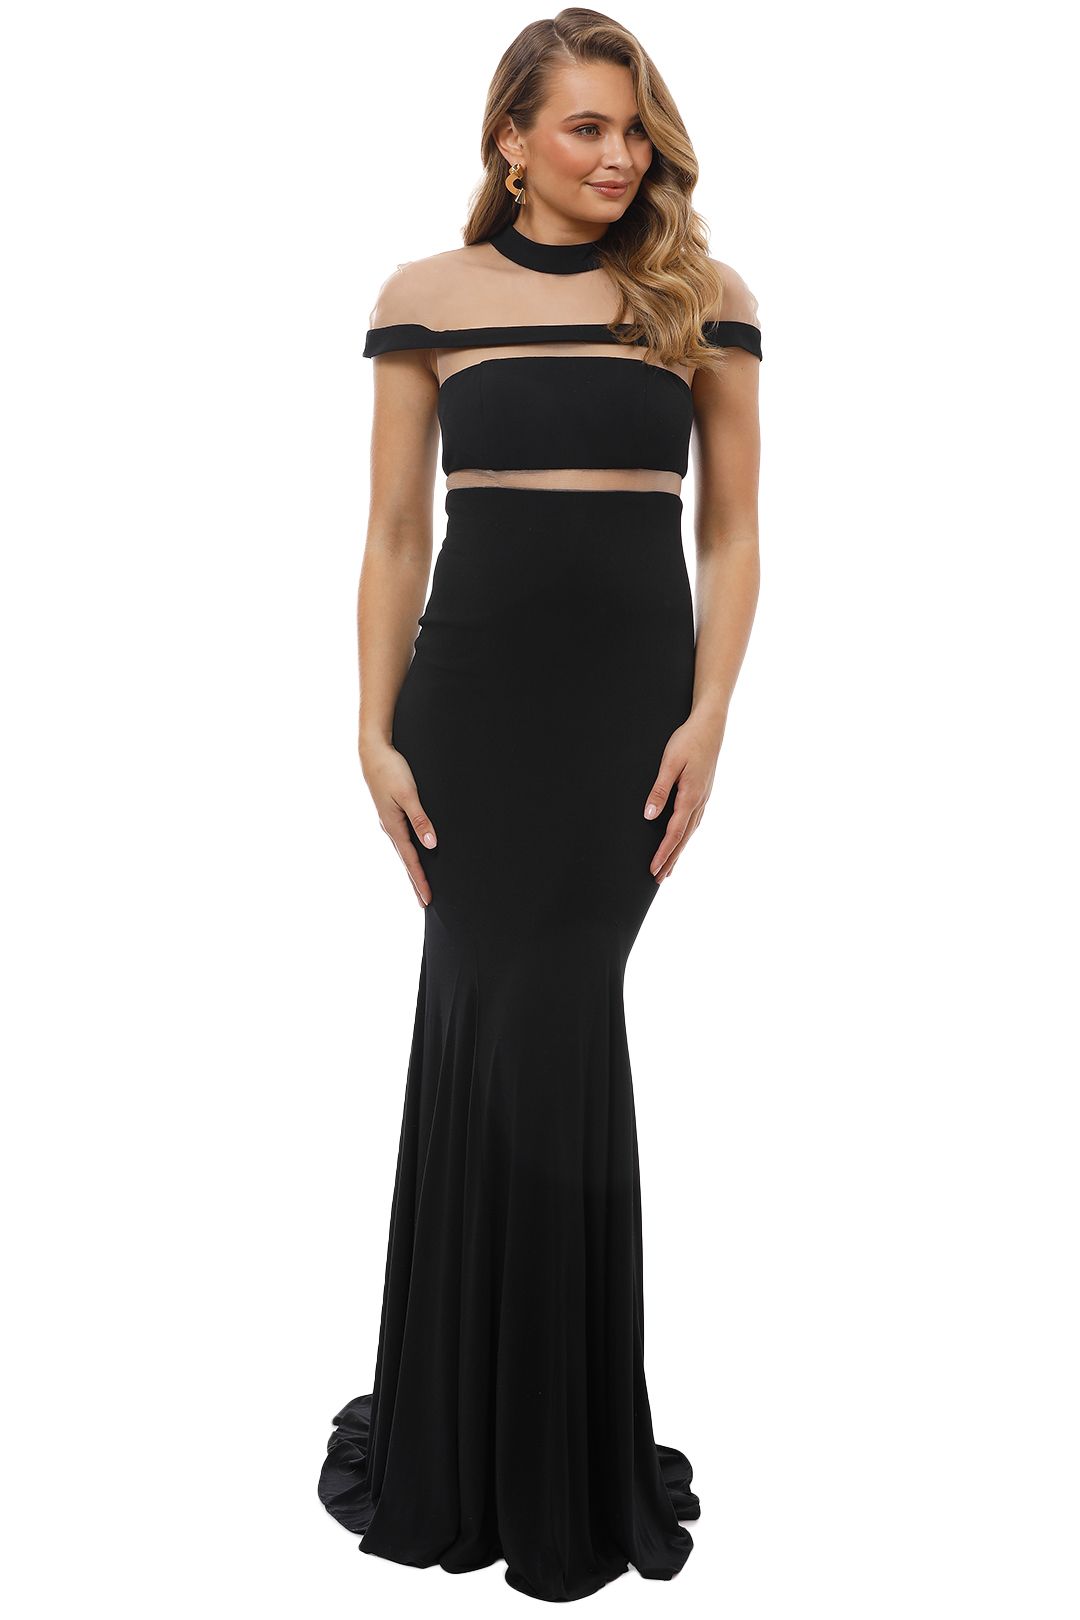 Grace and Hart - Muse Gown - Black - Front